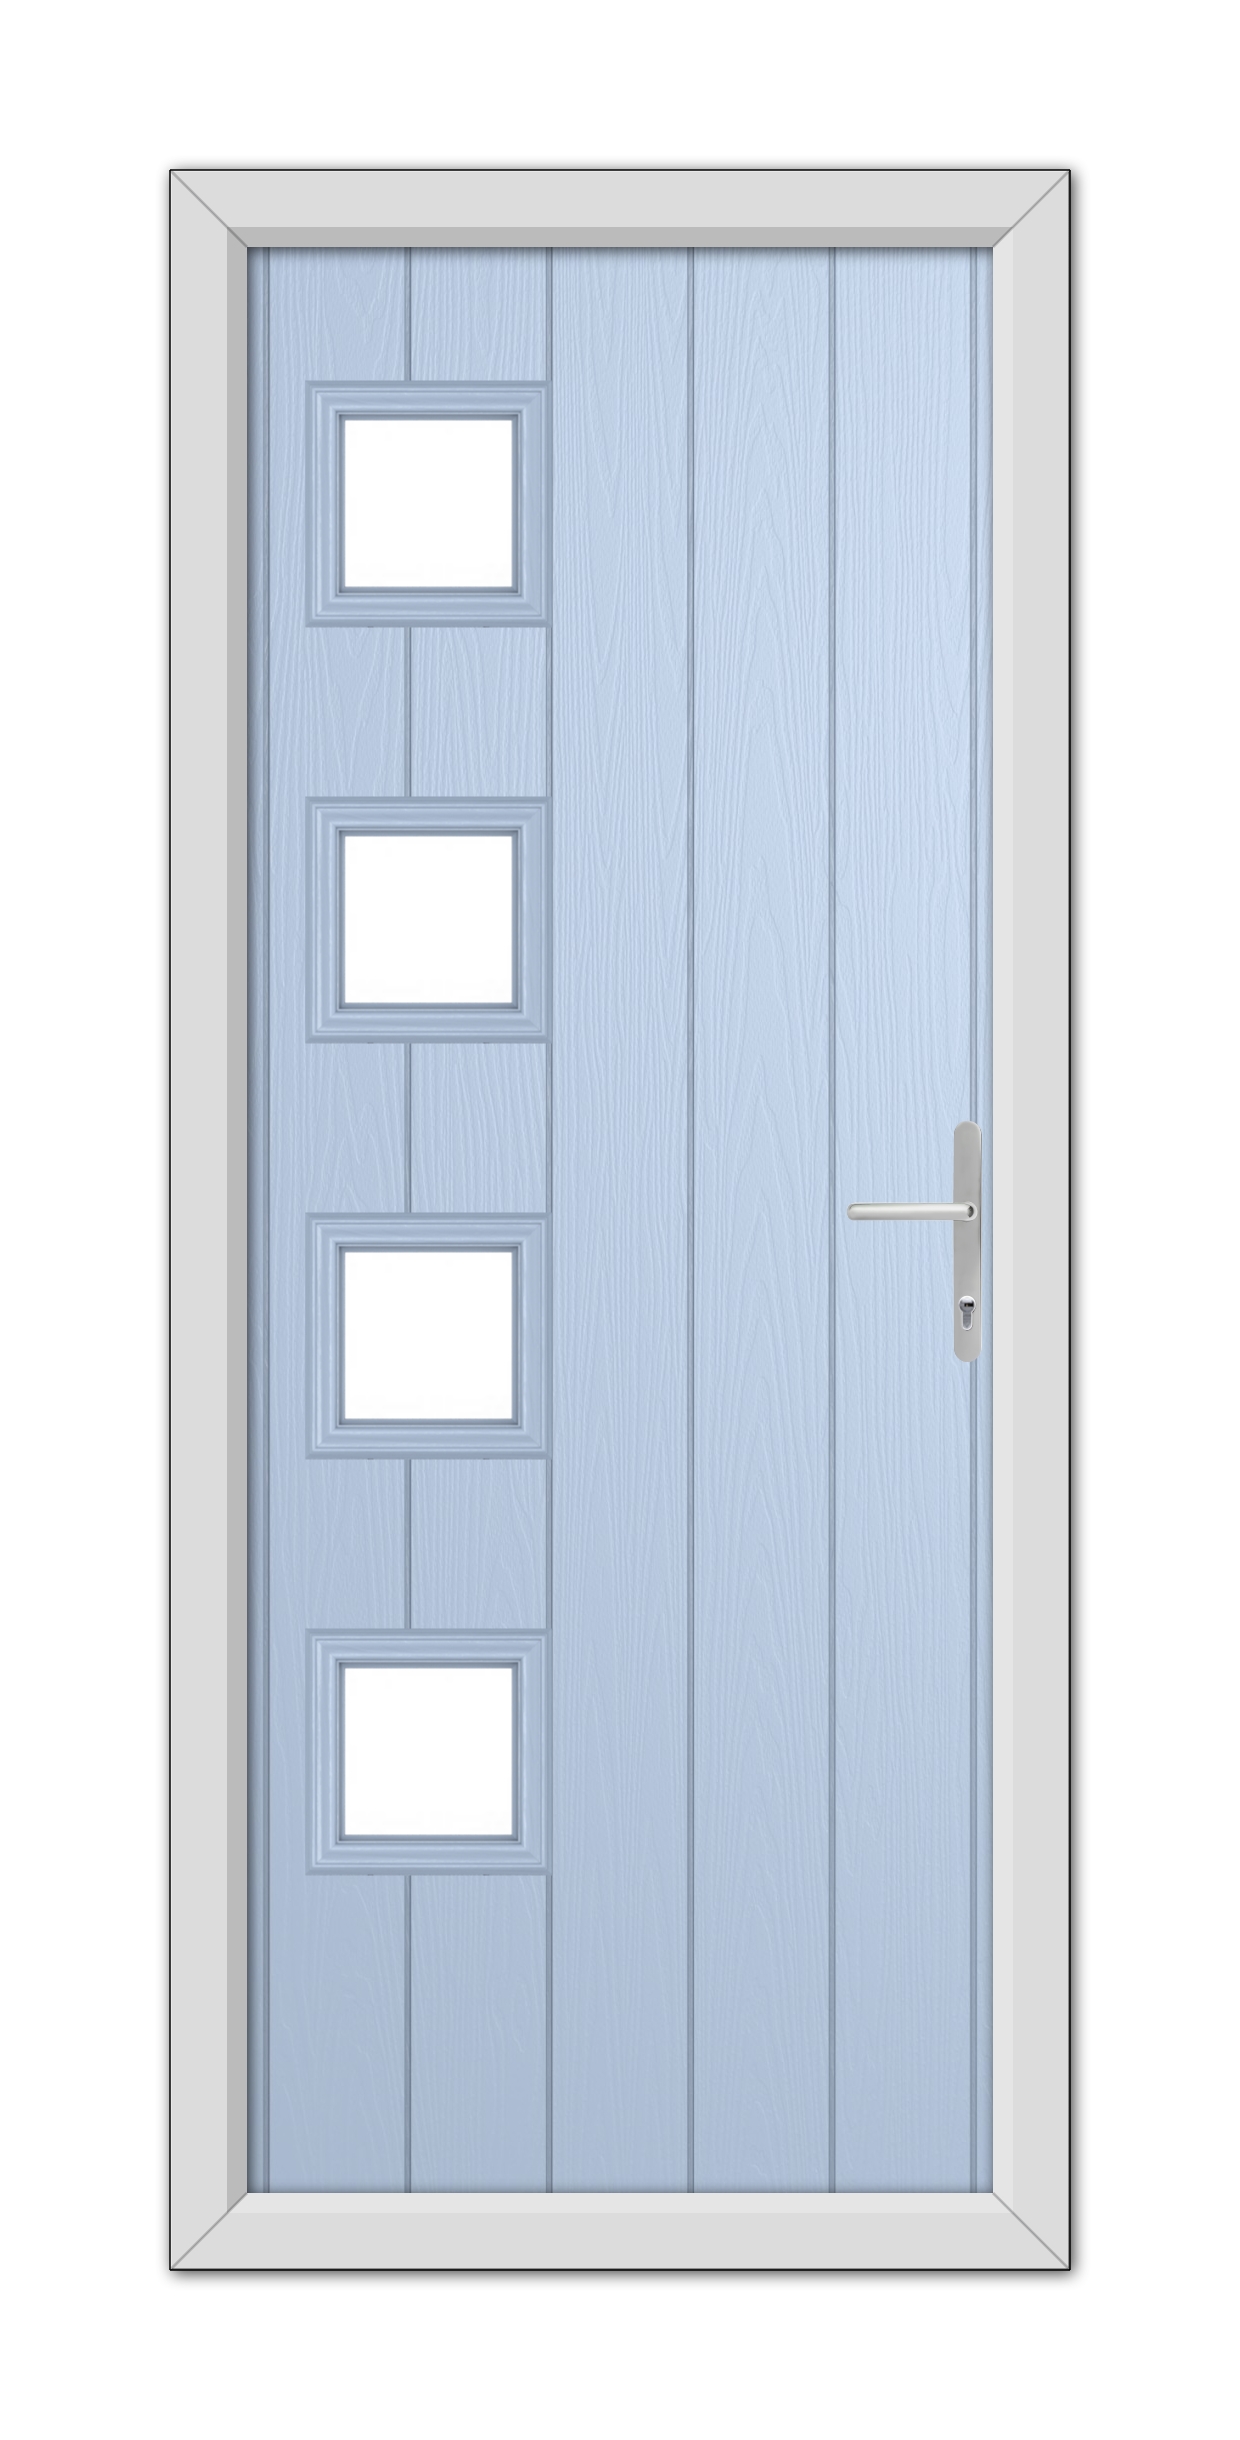 A modern Duck Egg Blue Sussex Composite Door 48mm Timber Core with four rectangular glass panels aligned vertically and a metallic handle on the right, set within a white frame.